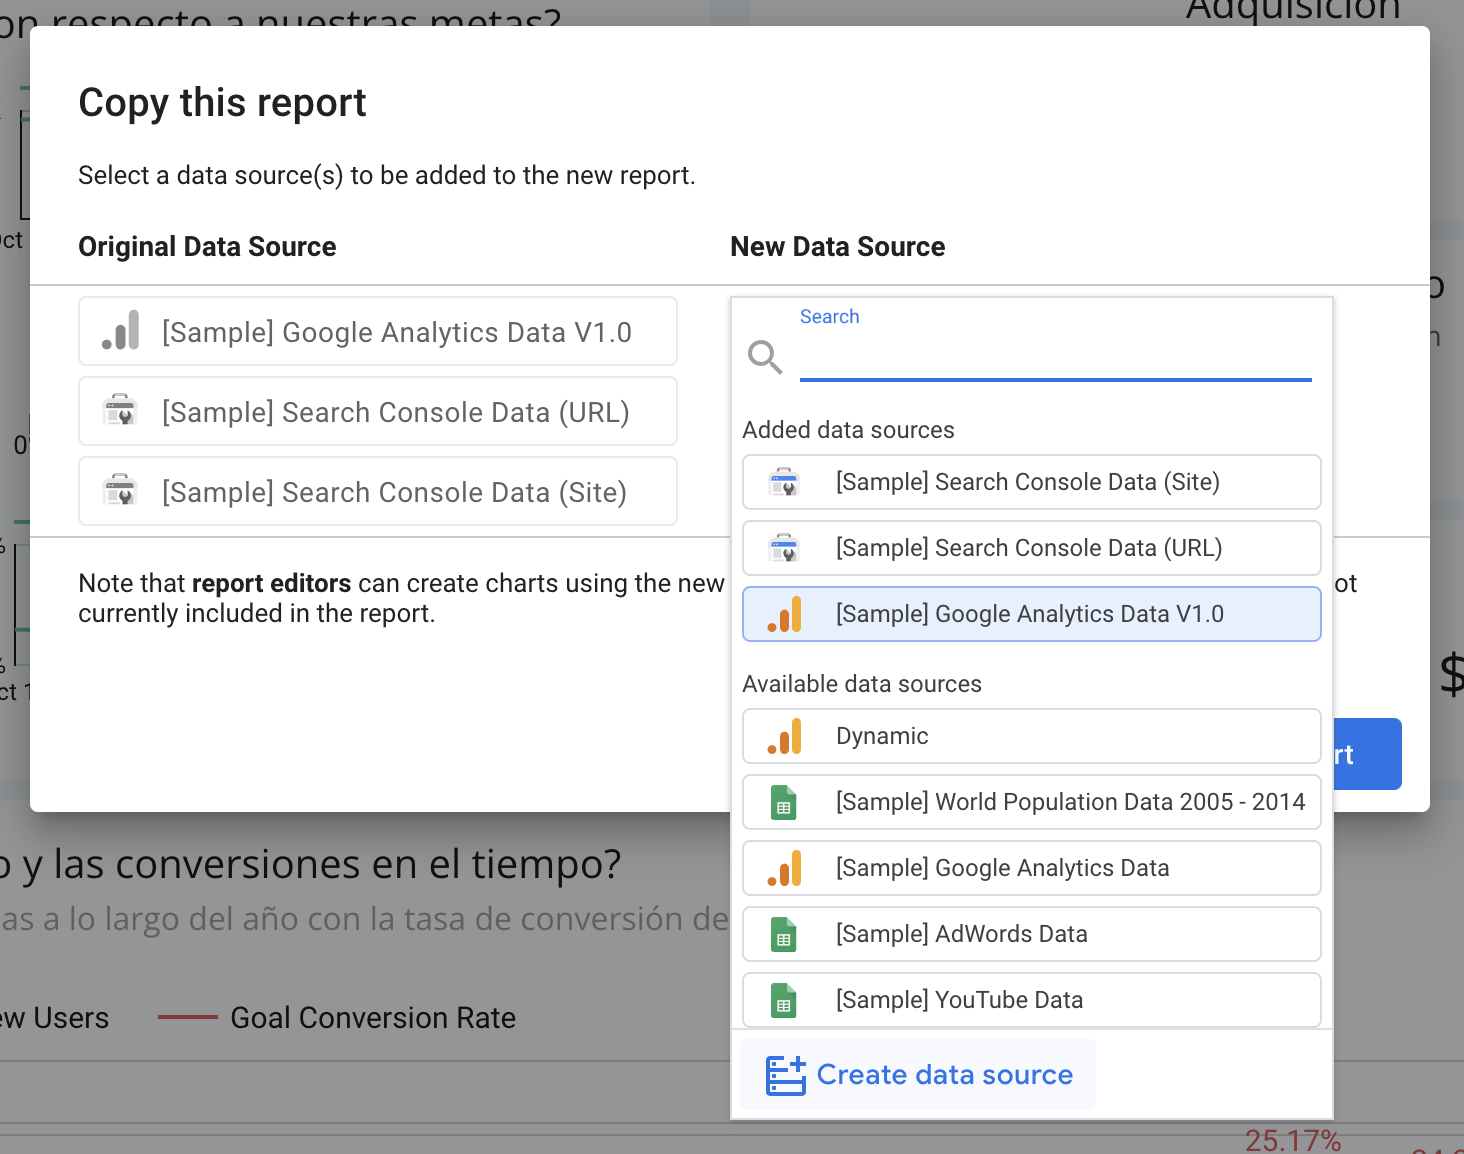 Image showing the New Data Source in the Copy this Report window.